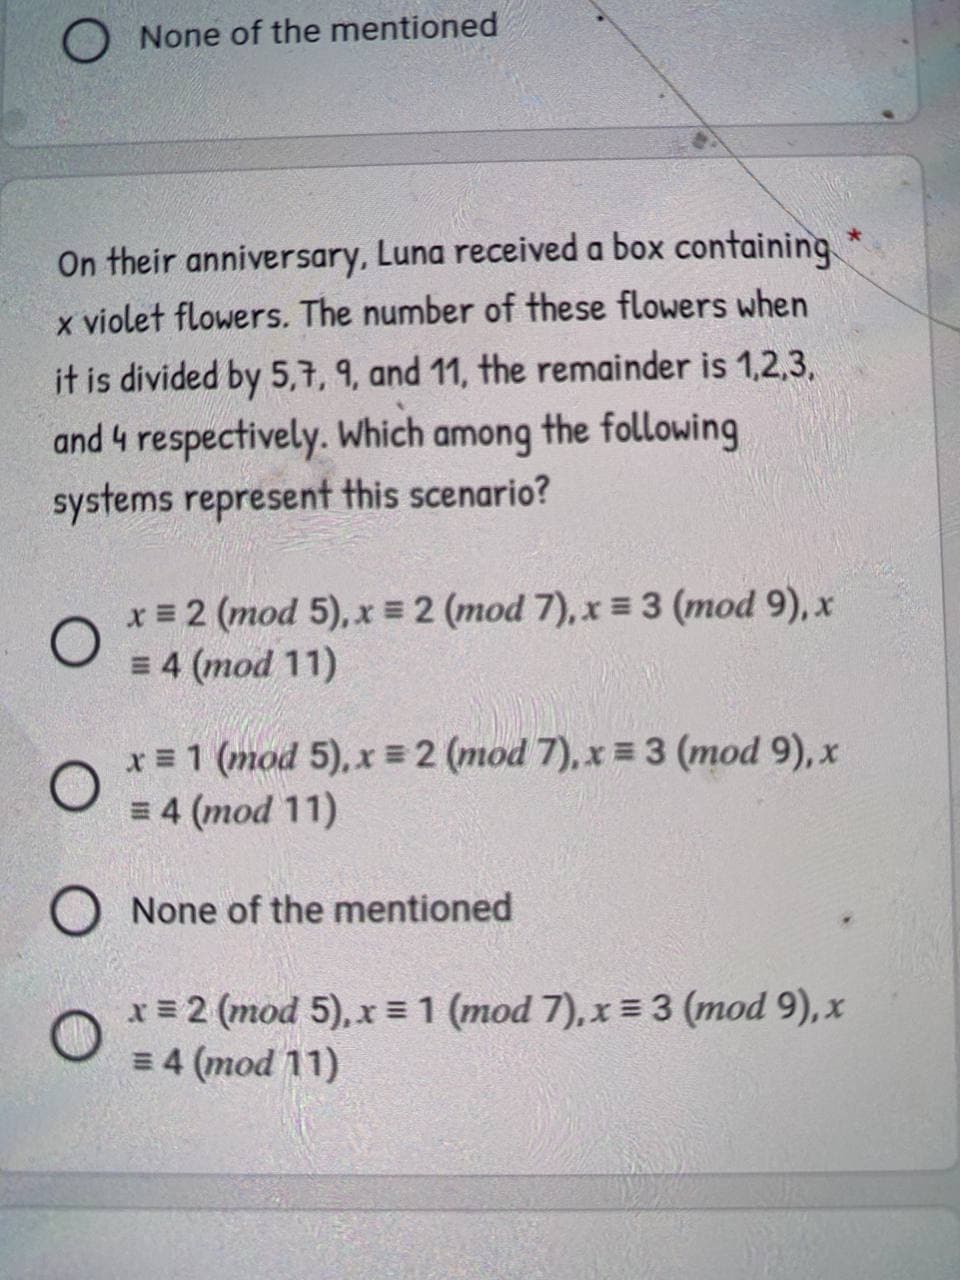 O None of the mentioned
On their anniversary, Luna received a box containing
x violet flowers. The number of these flowers when
it is divided by 5,7, 9, and 11, the remainder is 1,2,3,
and 4 respectively. Which among the following
systems represent this scenario?
x = 2 (mod 5), x = 2 (mod 7), x = 3 (mod 9), x
= 4 (mod 11)
x = 1 (mod 5), x 2 (mod 7), x = 3 (mod 9), x
= 4 (mod 11)
O None of the mentioned
x = 2 (mod 5), x = 1 (mod 7), x 3 (mod 9), x
= 4 (mod 11)
